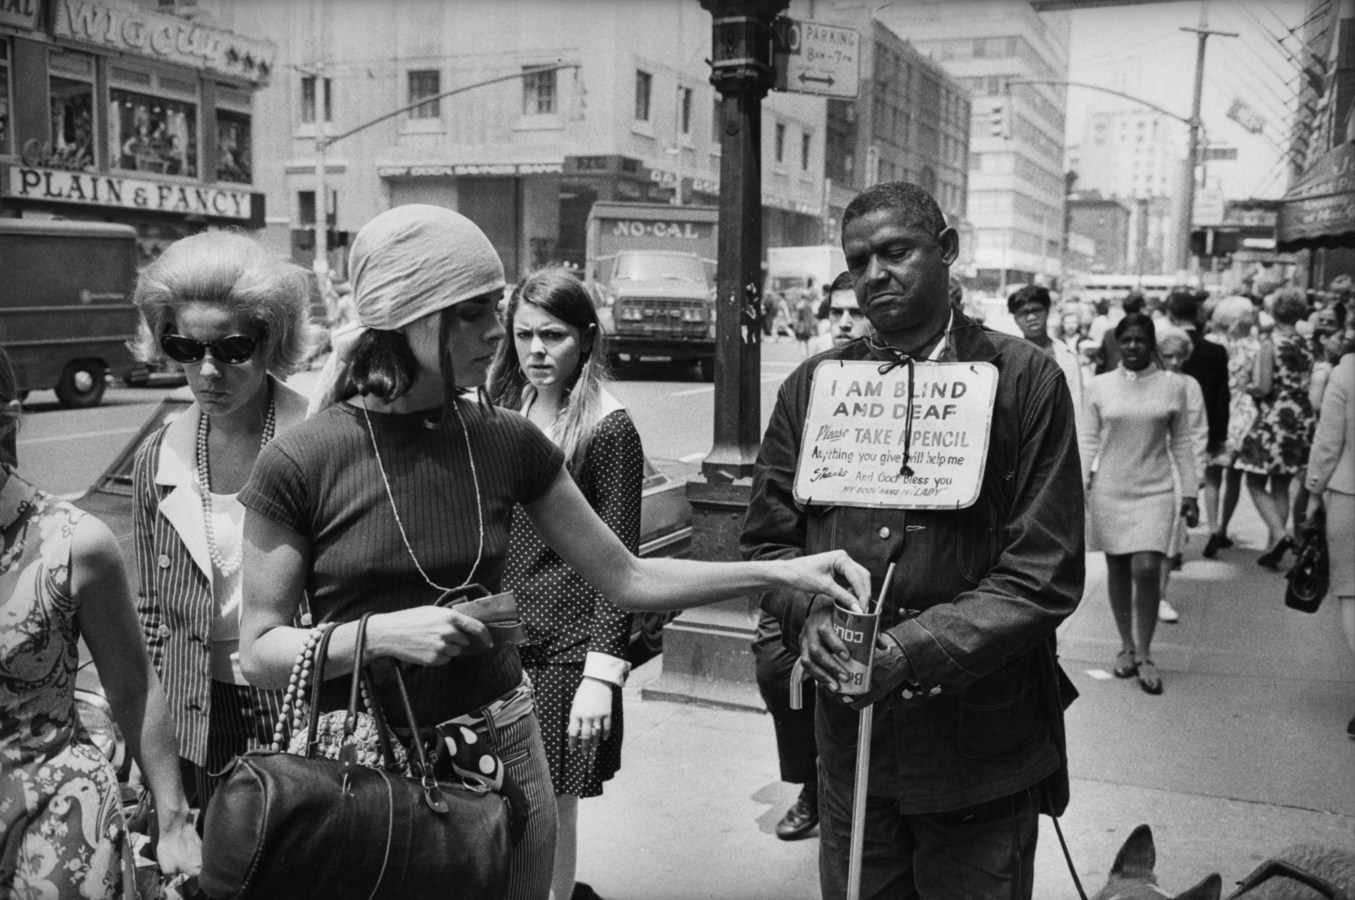 Black and white photograph of a bustling street scene depicting a women donating money to a person on street with sign